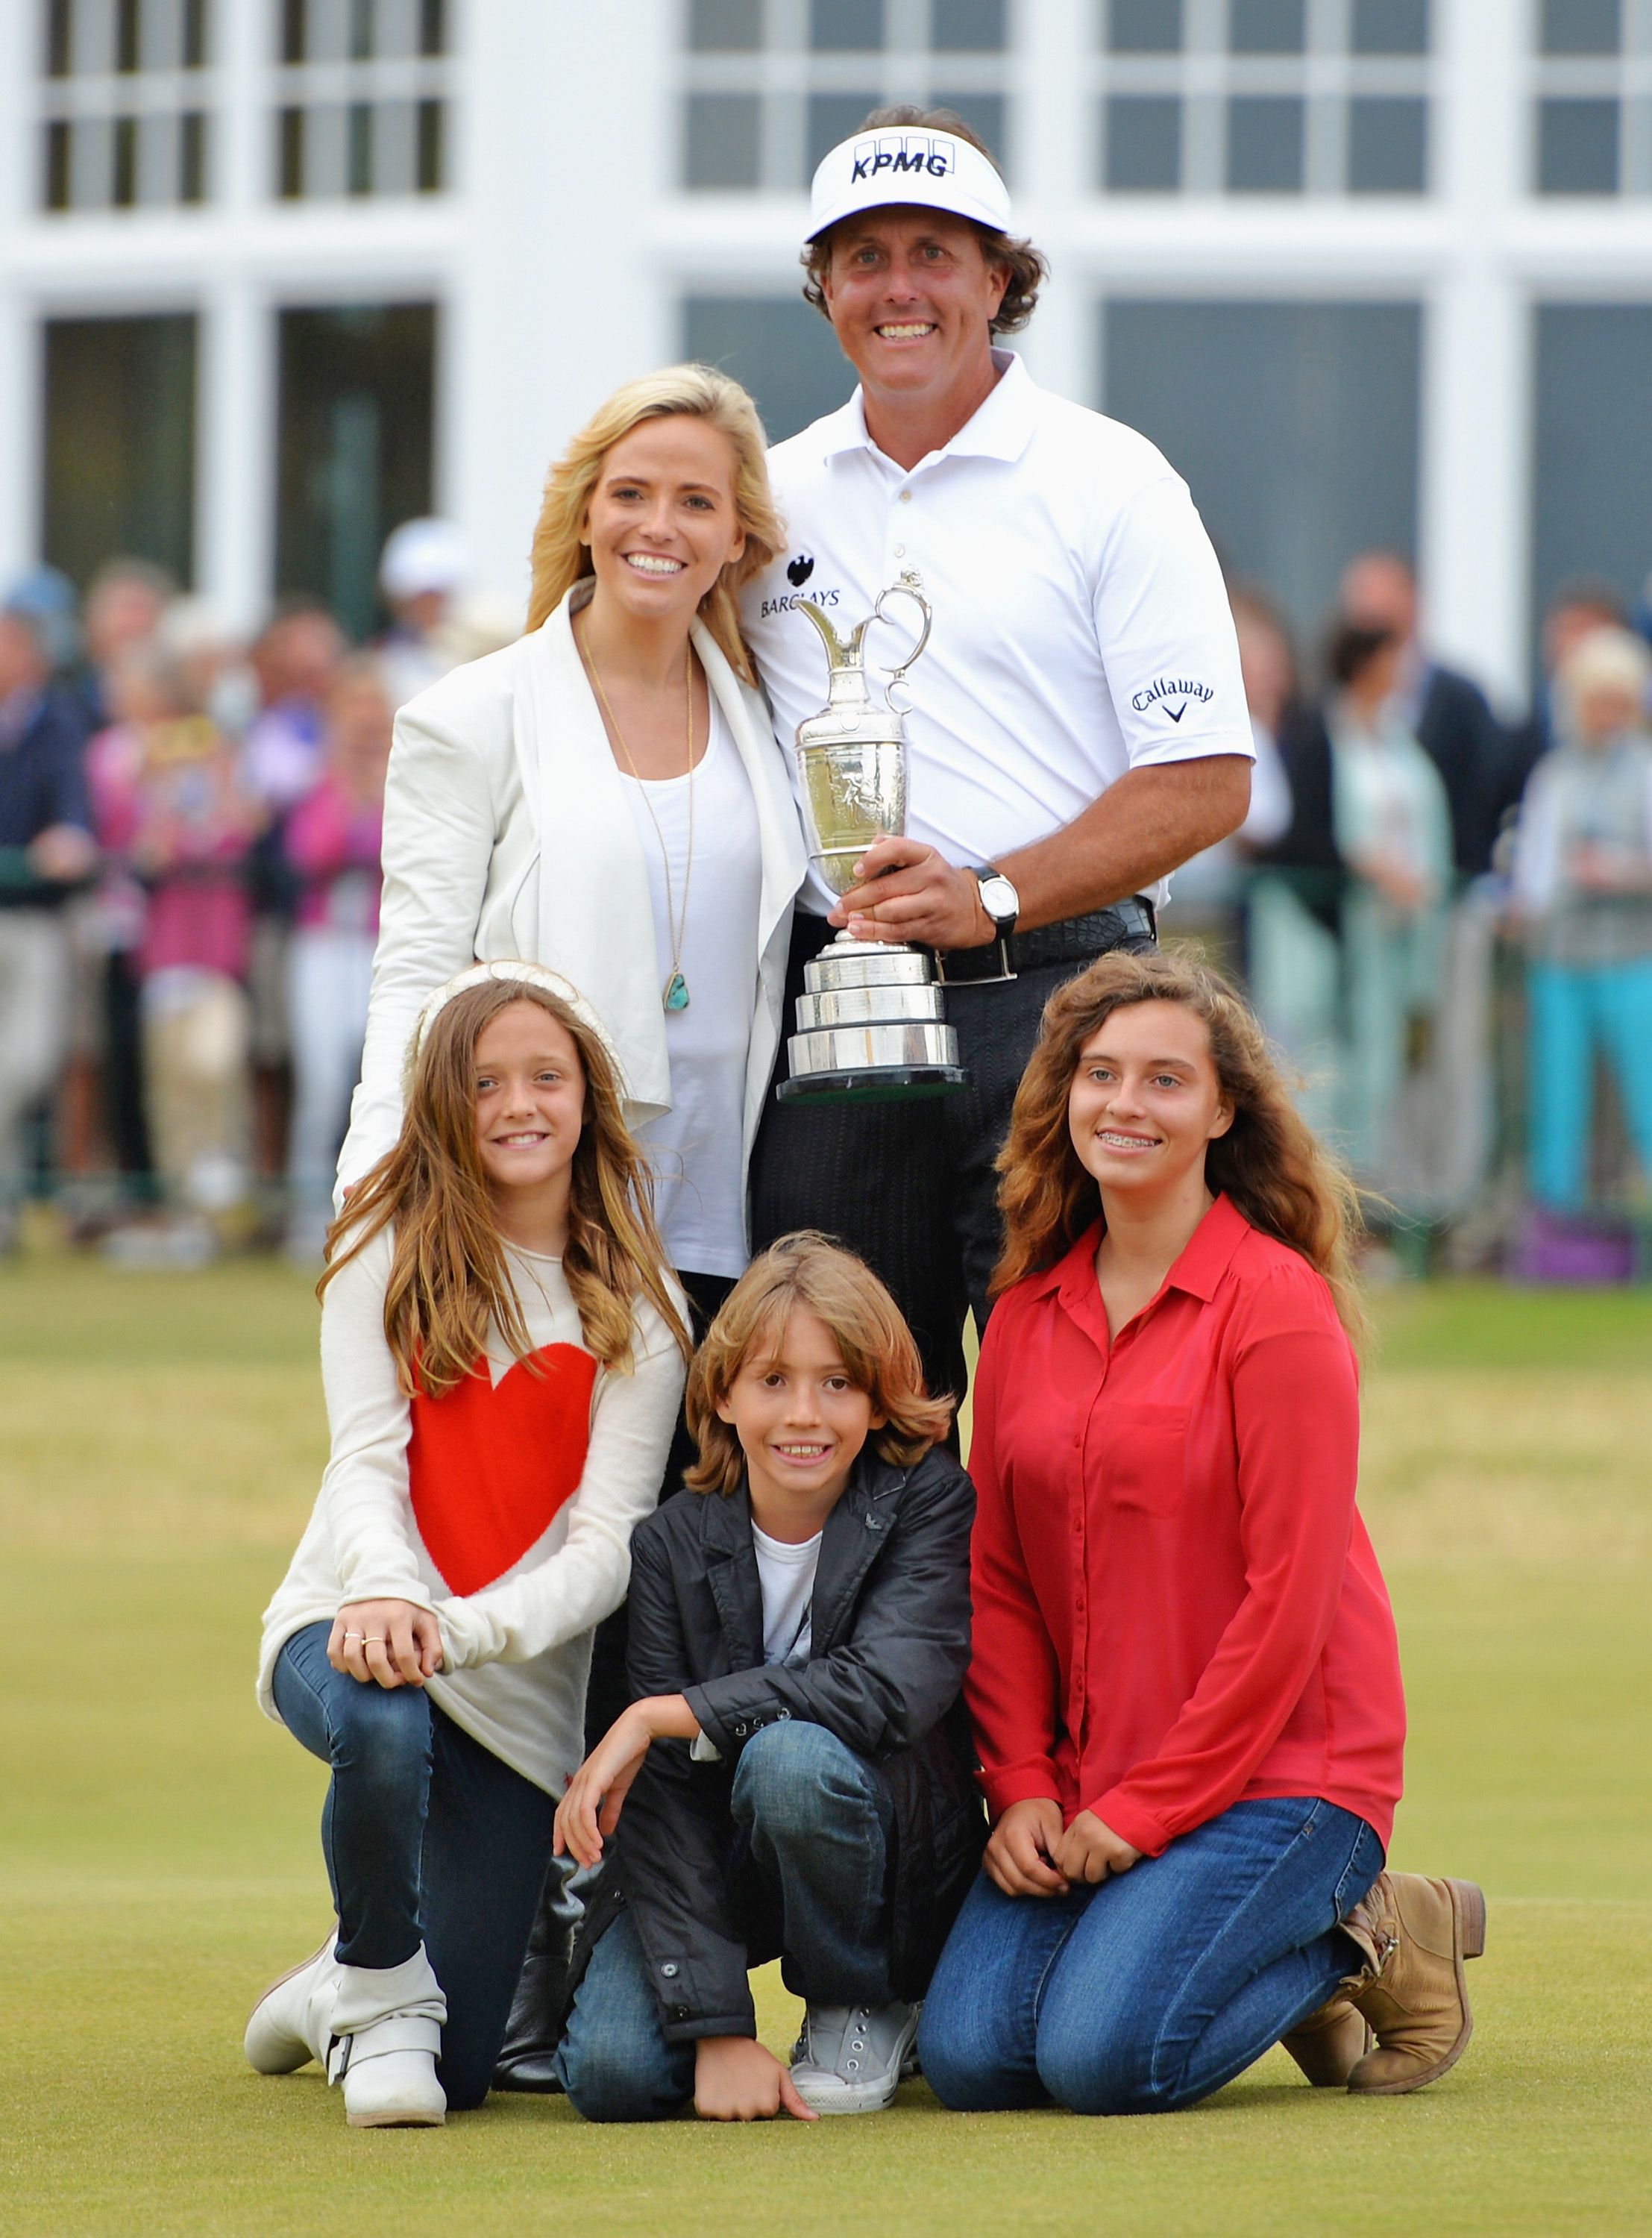 Phil Mickelson wife Amy and children Evan, Amanda and Sophia after winning the 142nd Open Championship in 2013 in Scotland | Source: Getty